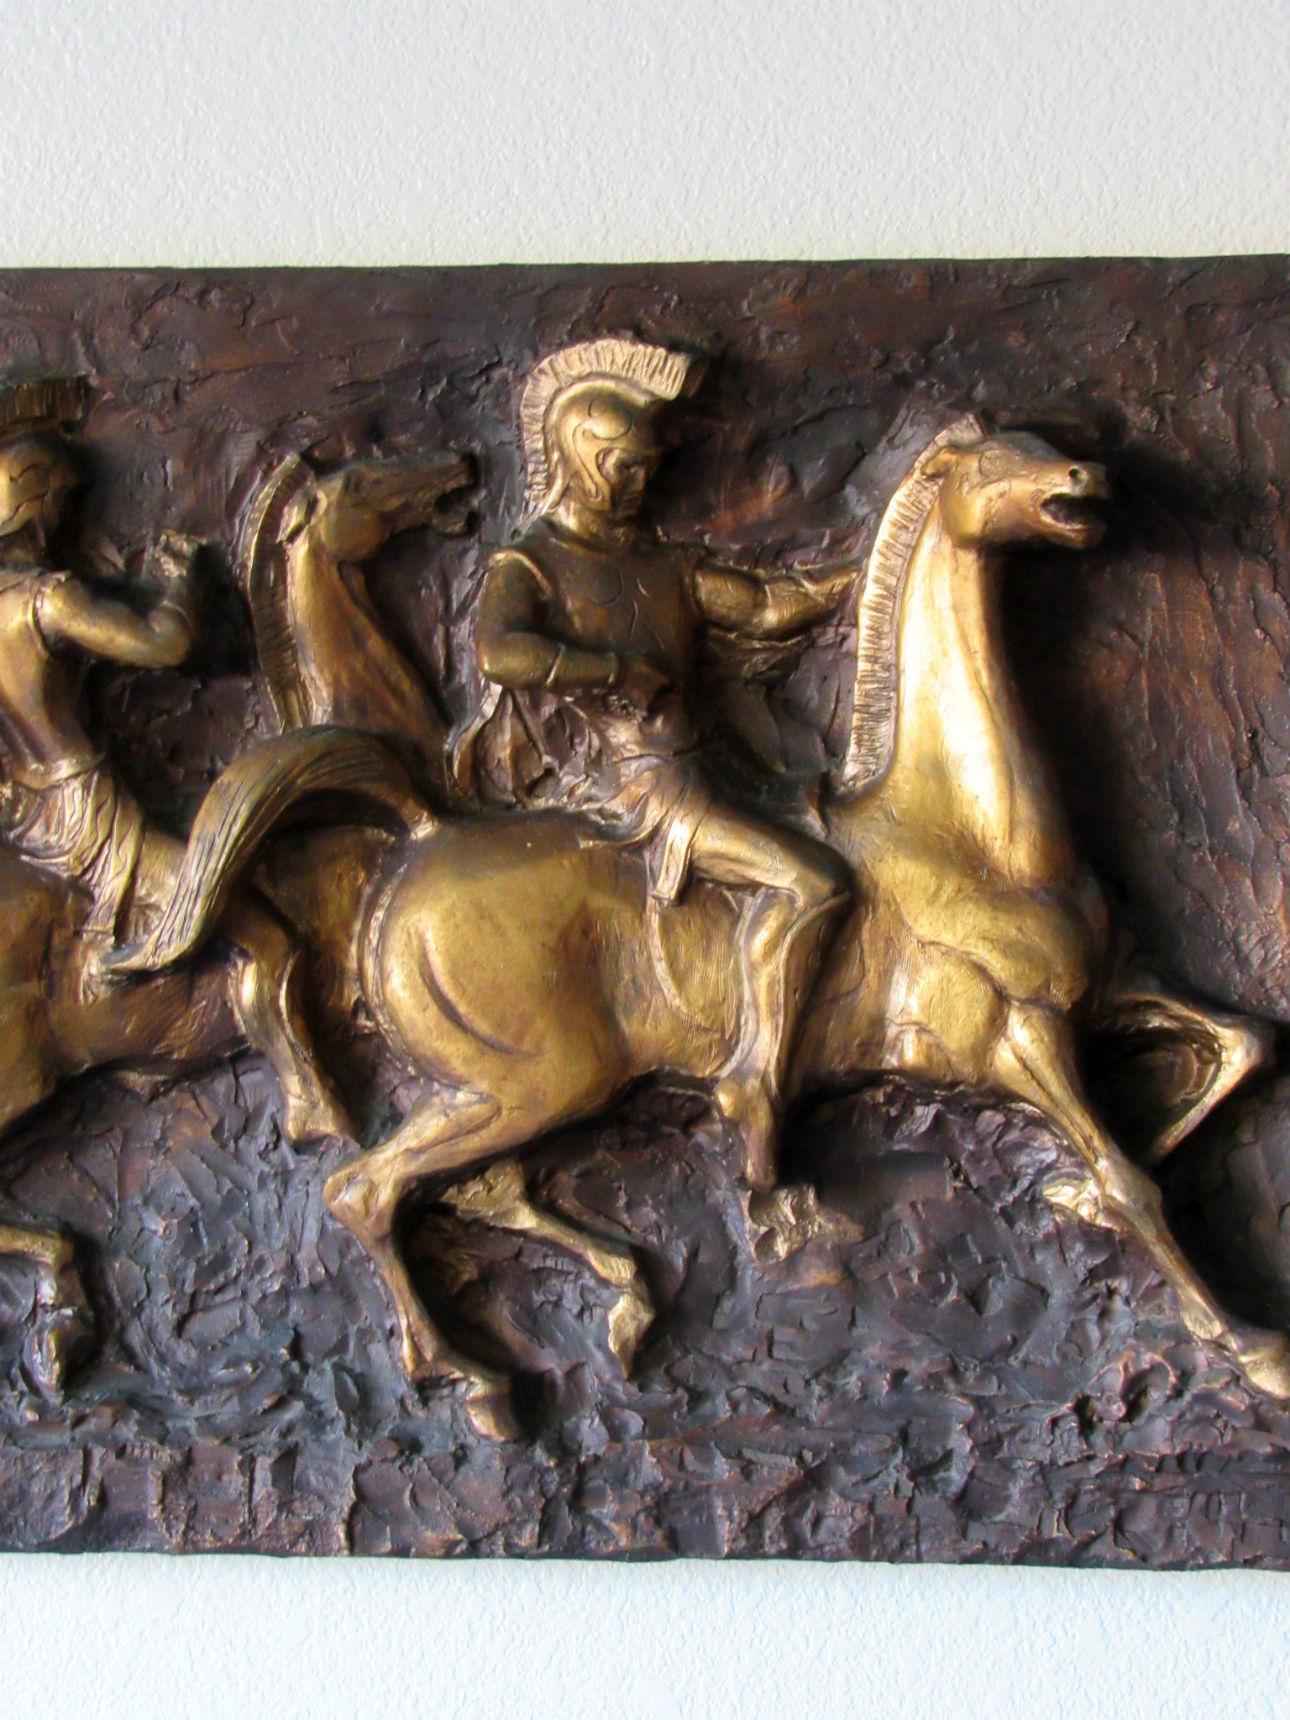 J. Segura Roman Soldiers on Horses cast resin wall sculpture, 1960s. Made by J. Segura, a Miami company, this wall mount relief depicts Roman soldiers on horseback and is made in cast resin. Original hanging tag on back, in very good condition.